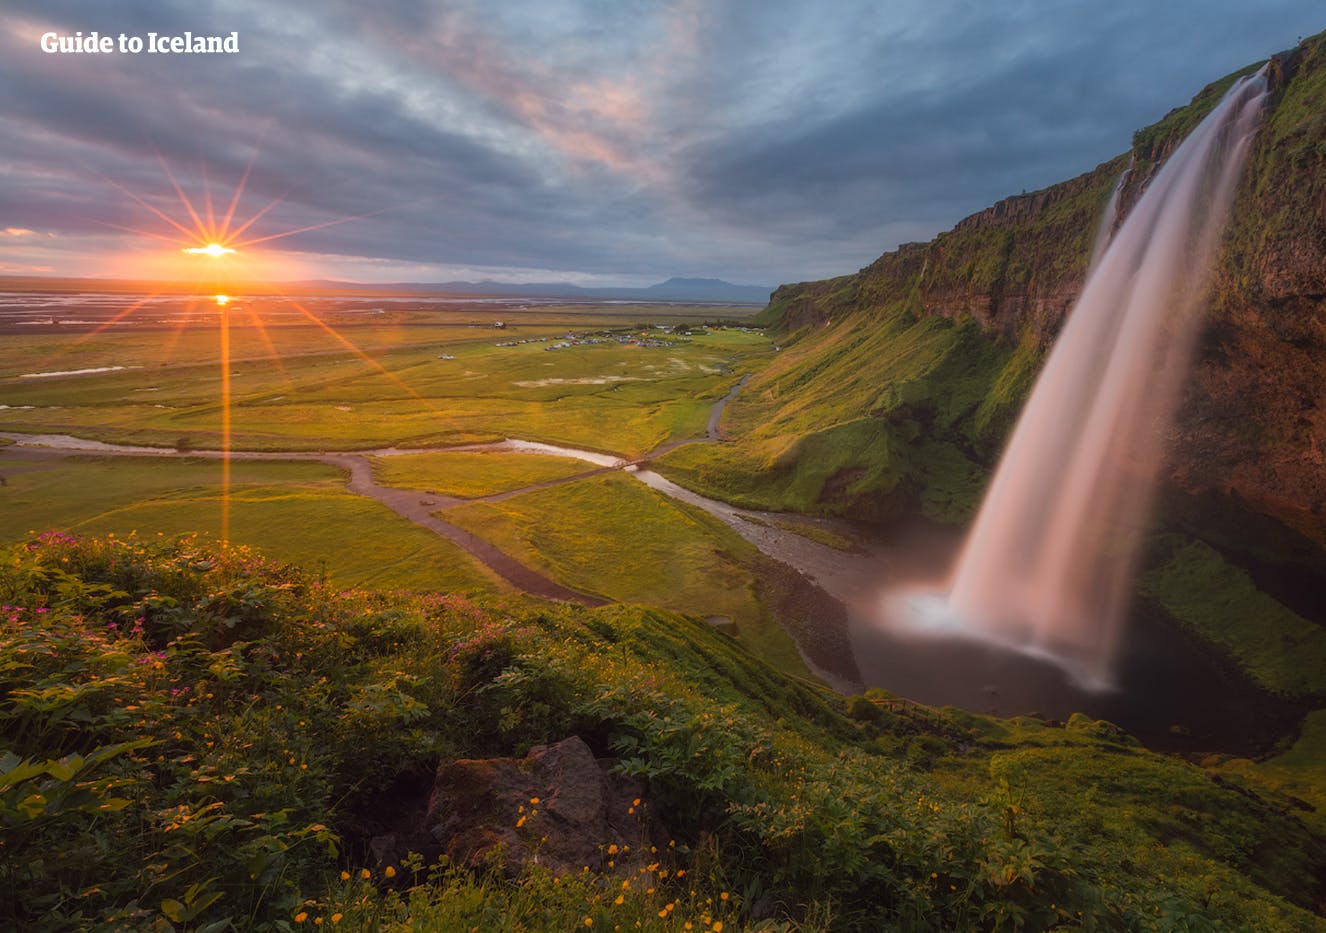 Standing behind the cascading water, photographers at Seljalandsfoss are able to gain a rarely seen perspective, ensuring fascinating shots of the landscape.